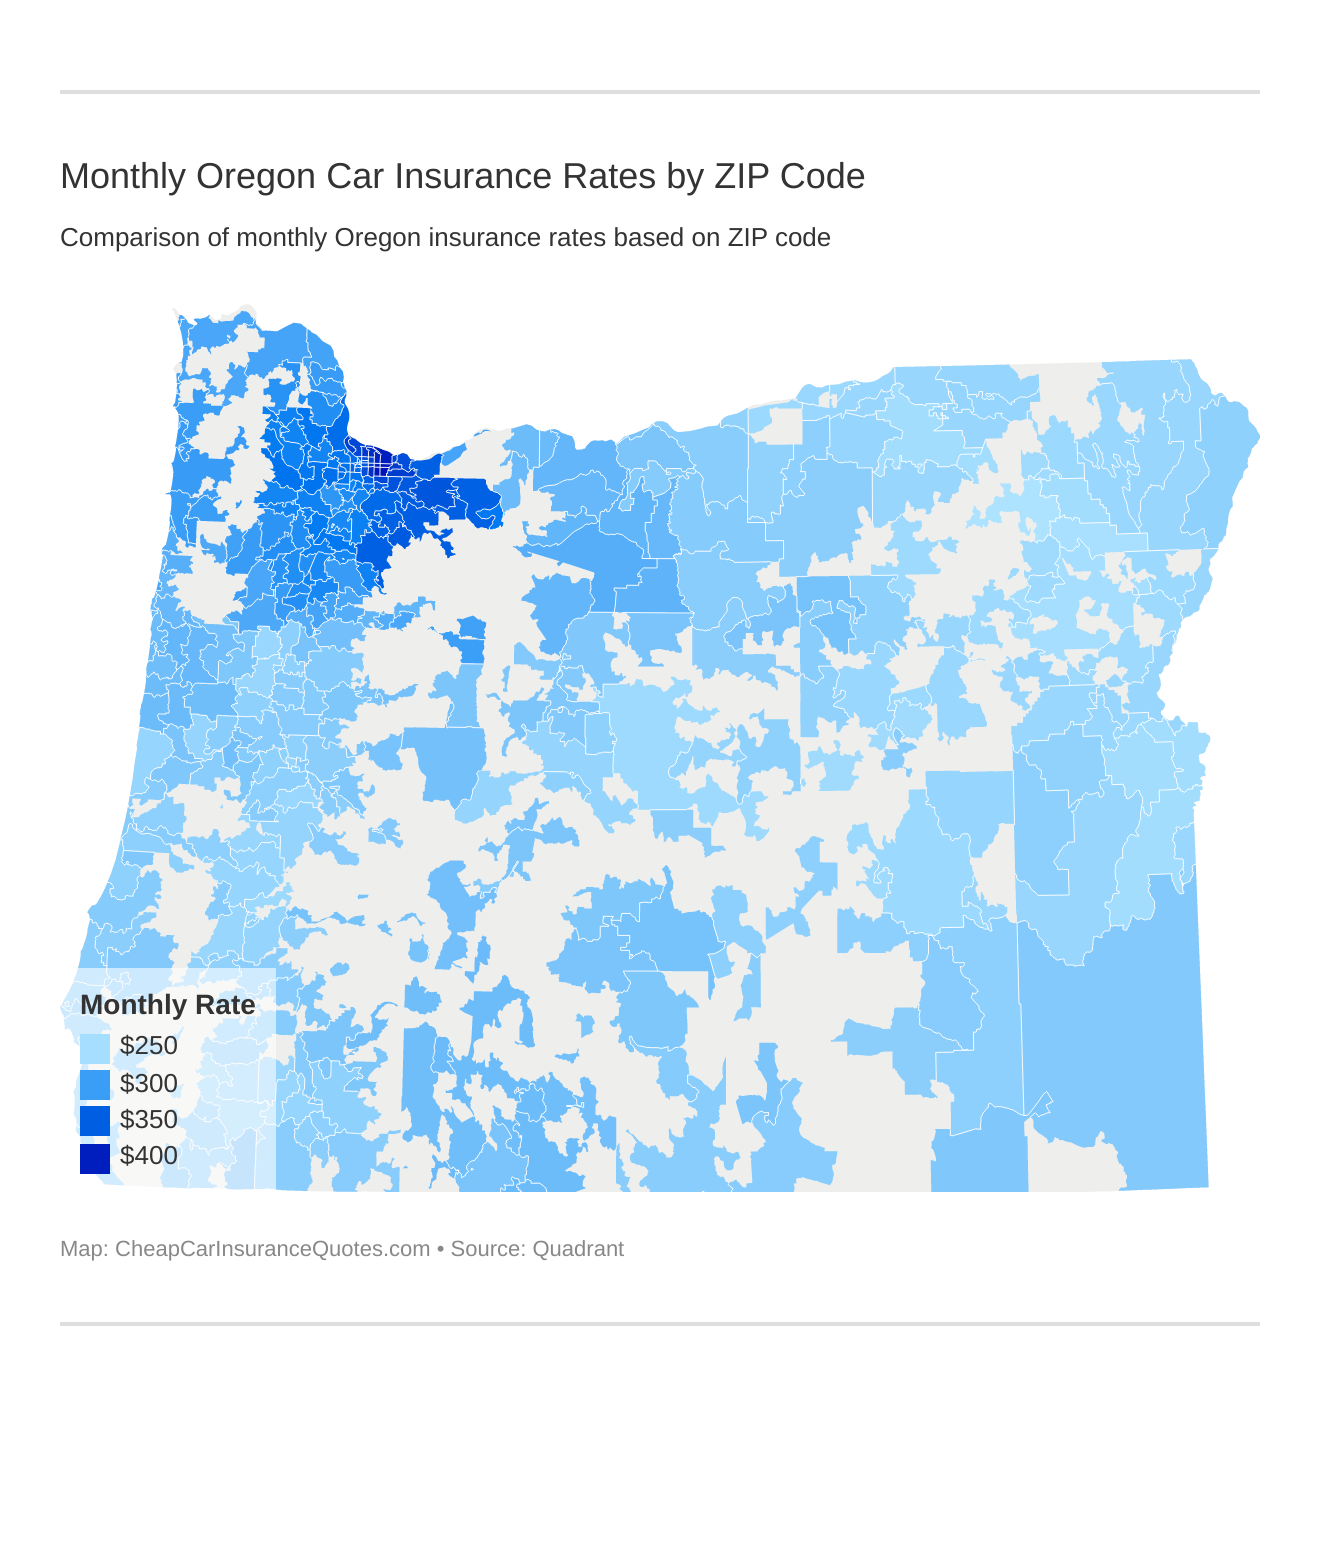 Monthly Oregon Car Insurance Rates by ZIP Code